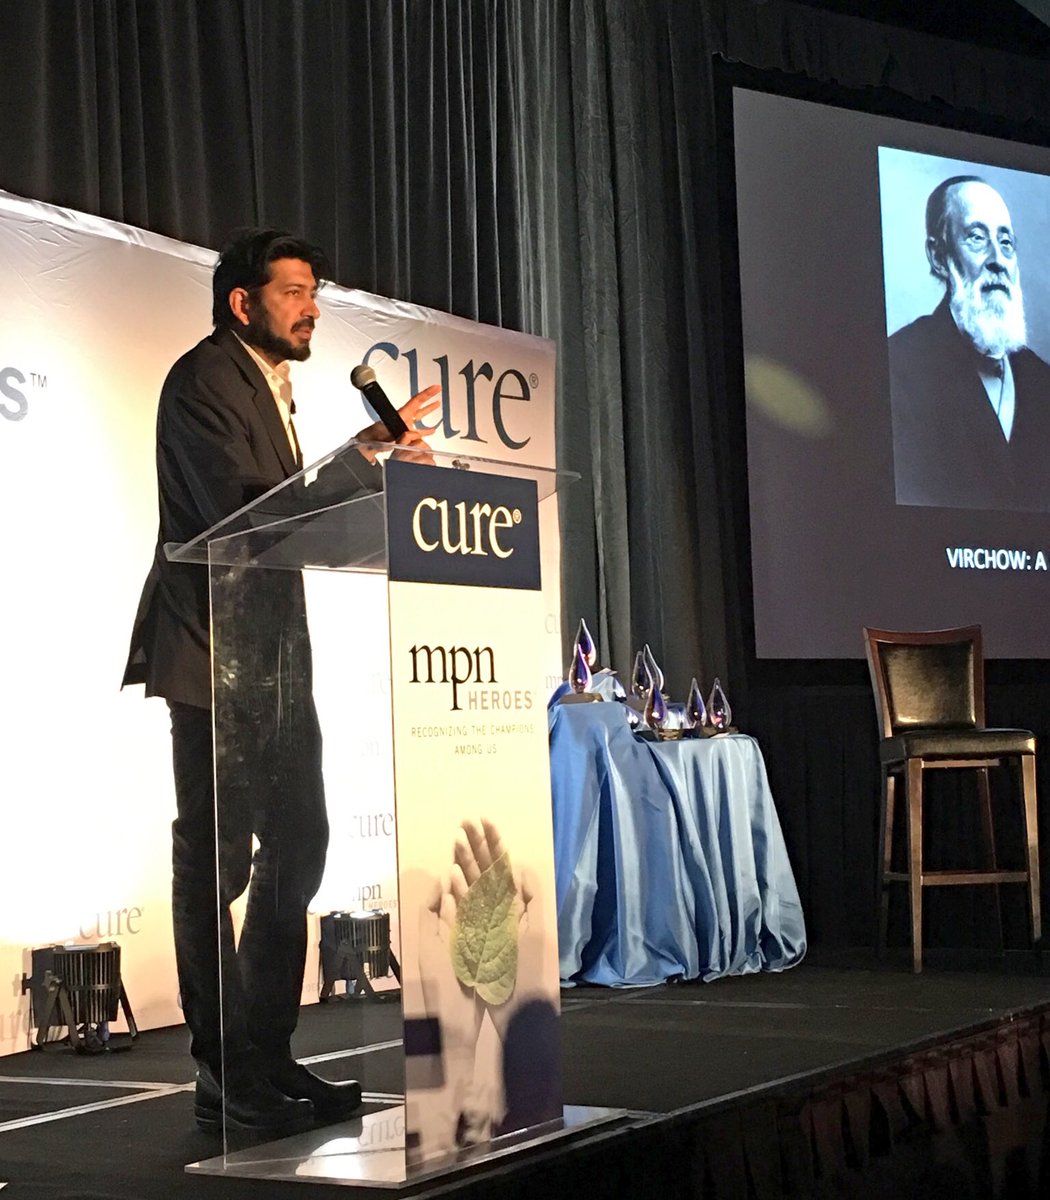 .@DrSidMukherjee speaking on history of #cancer at the #MPNheroes dinner in San Diego. He's doing great work on myeloid malignancies #ASH16